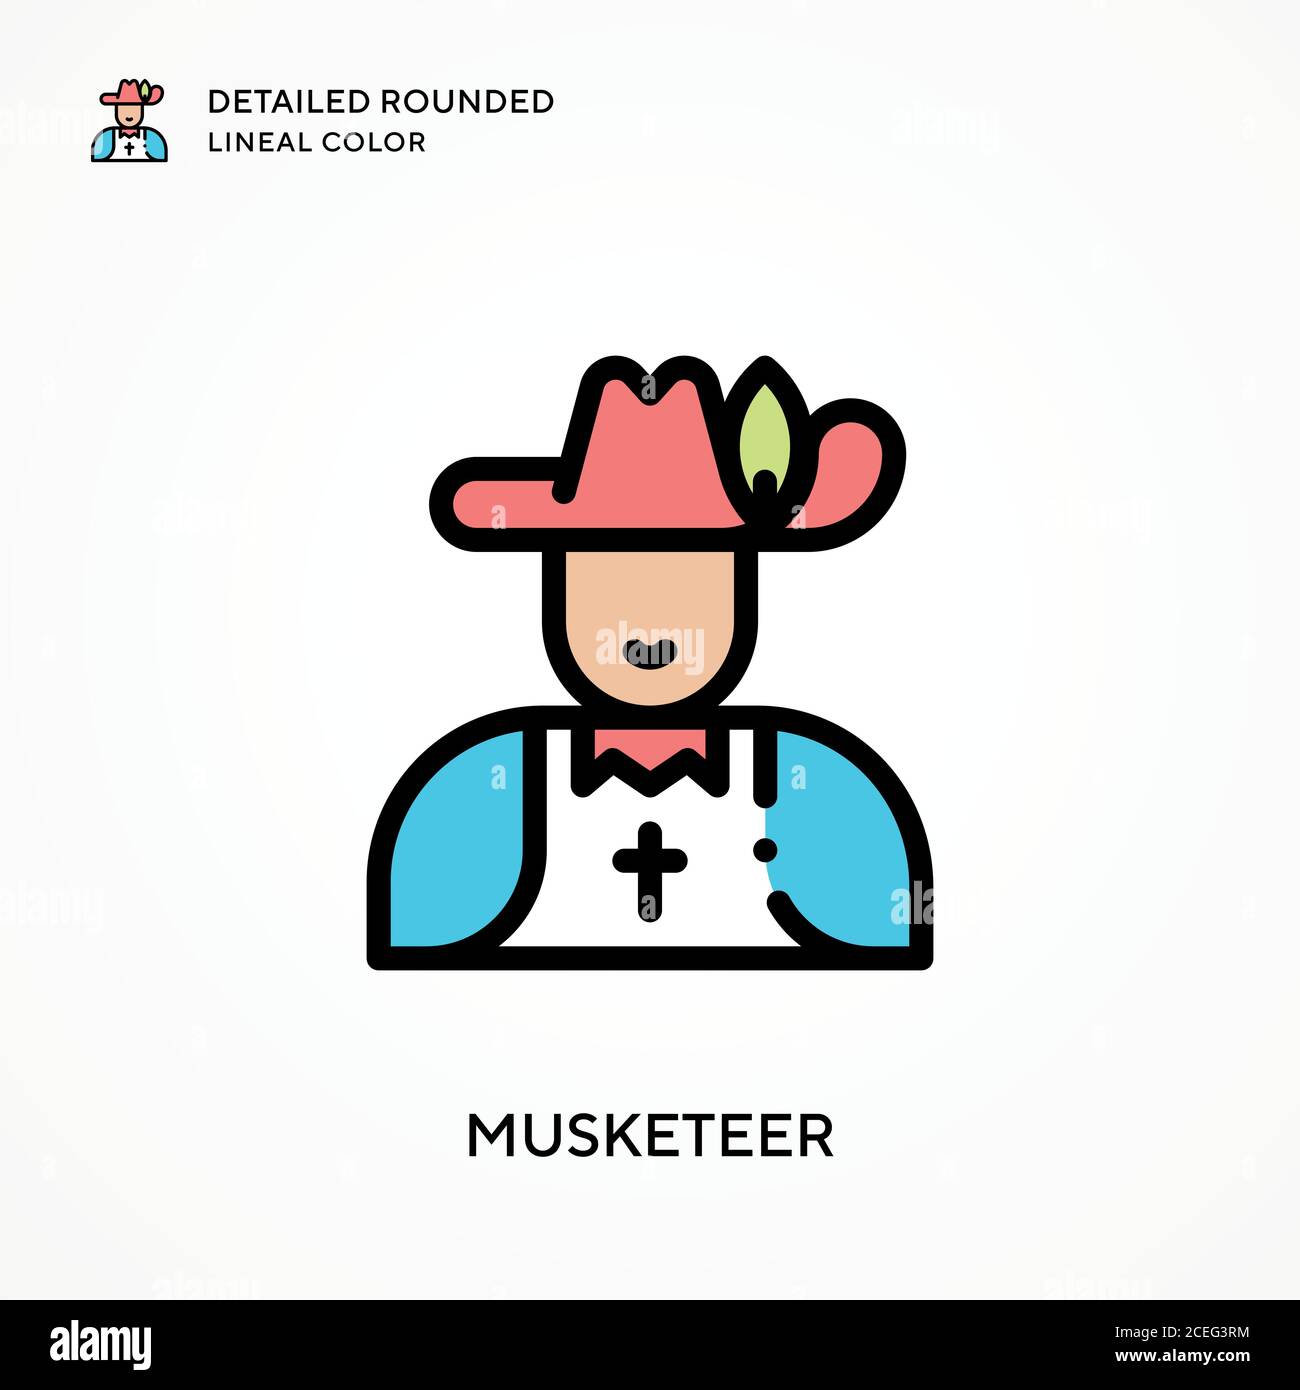 Musketeer detailed rounded lineal color. Modern vector illustration concepts. Easy to edit and customize. Stock Vector